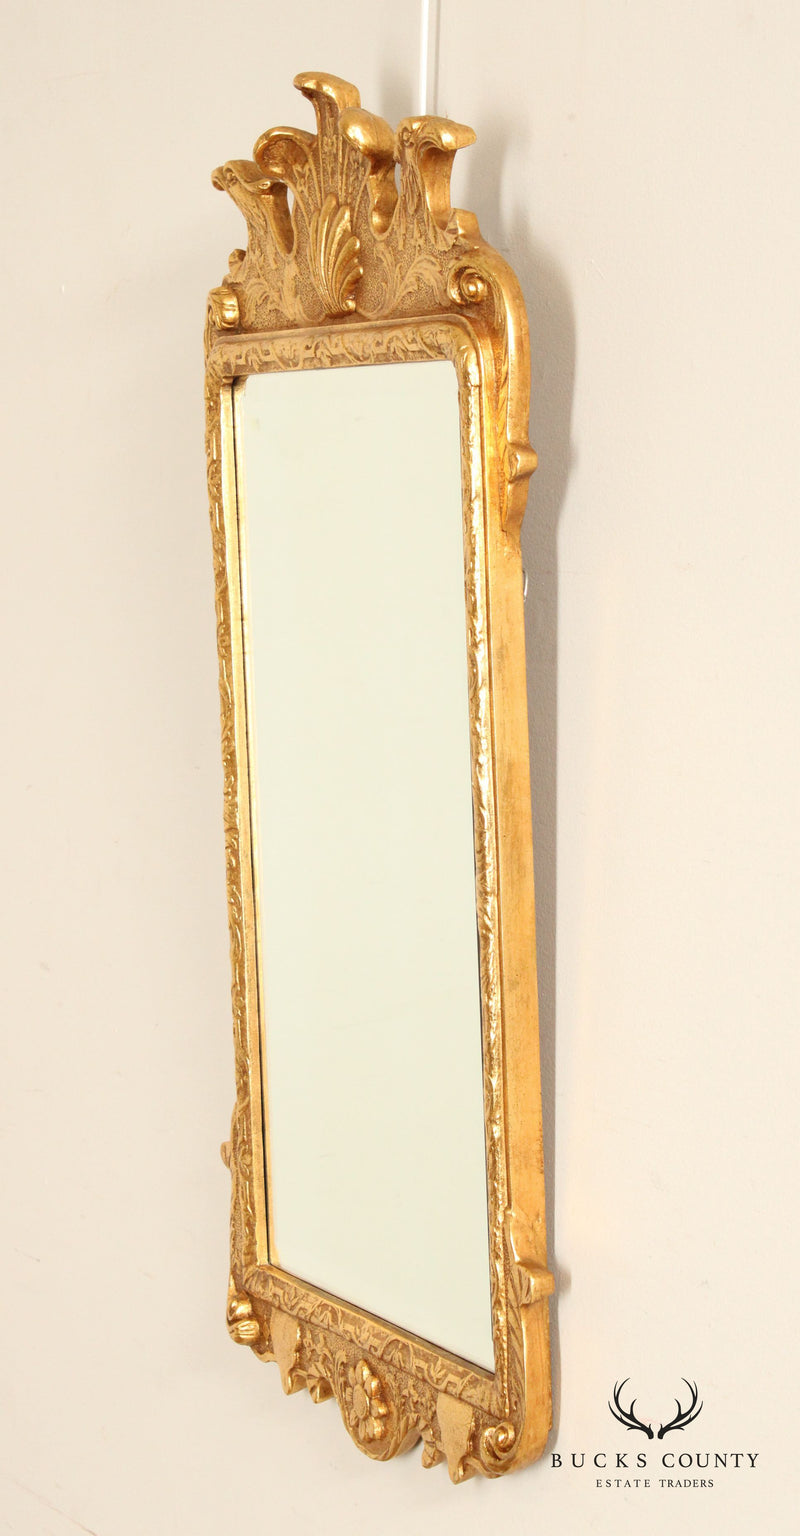 Friedman Brothers 'Colonial Williamsburg' Gilt Eagle Carved Mirror